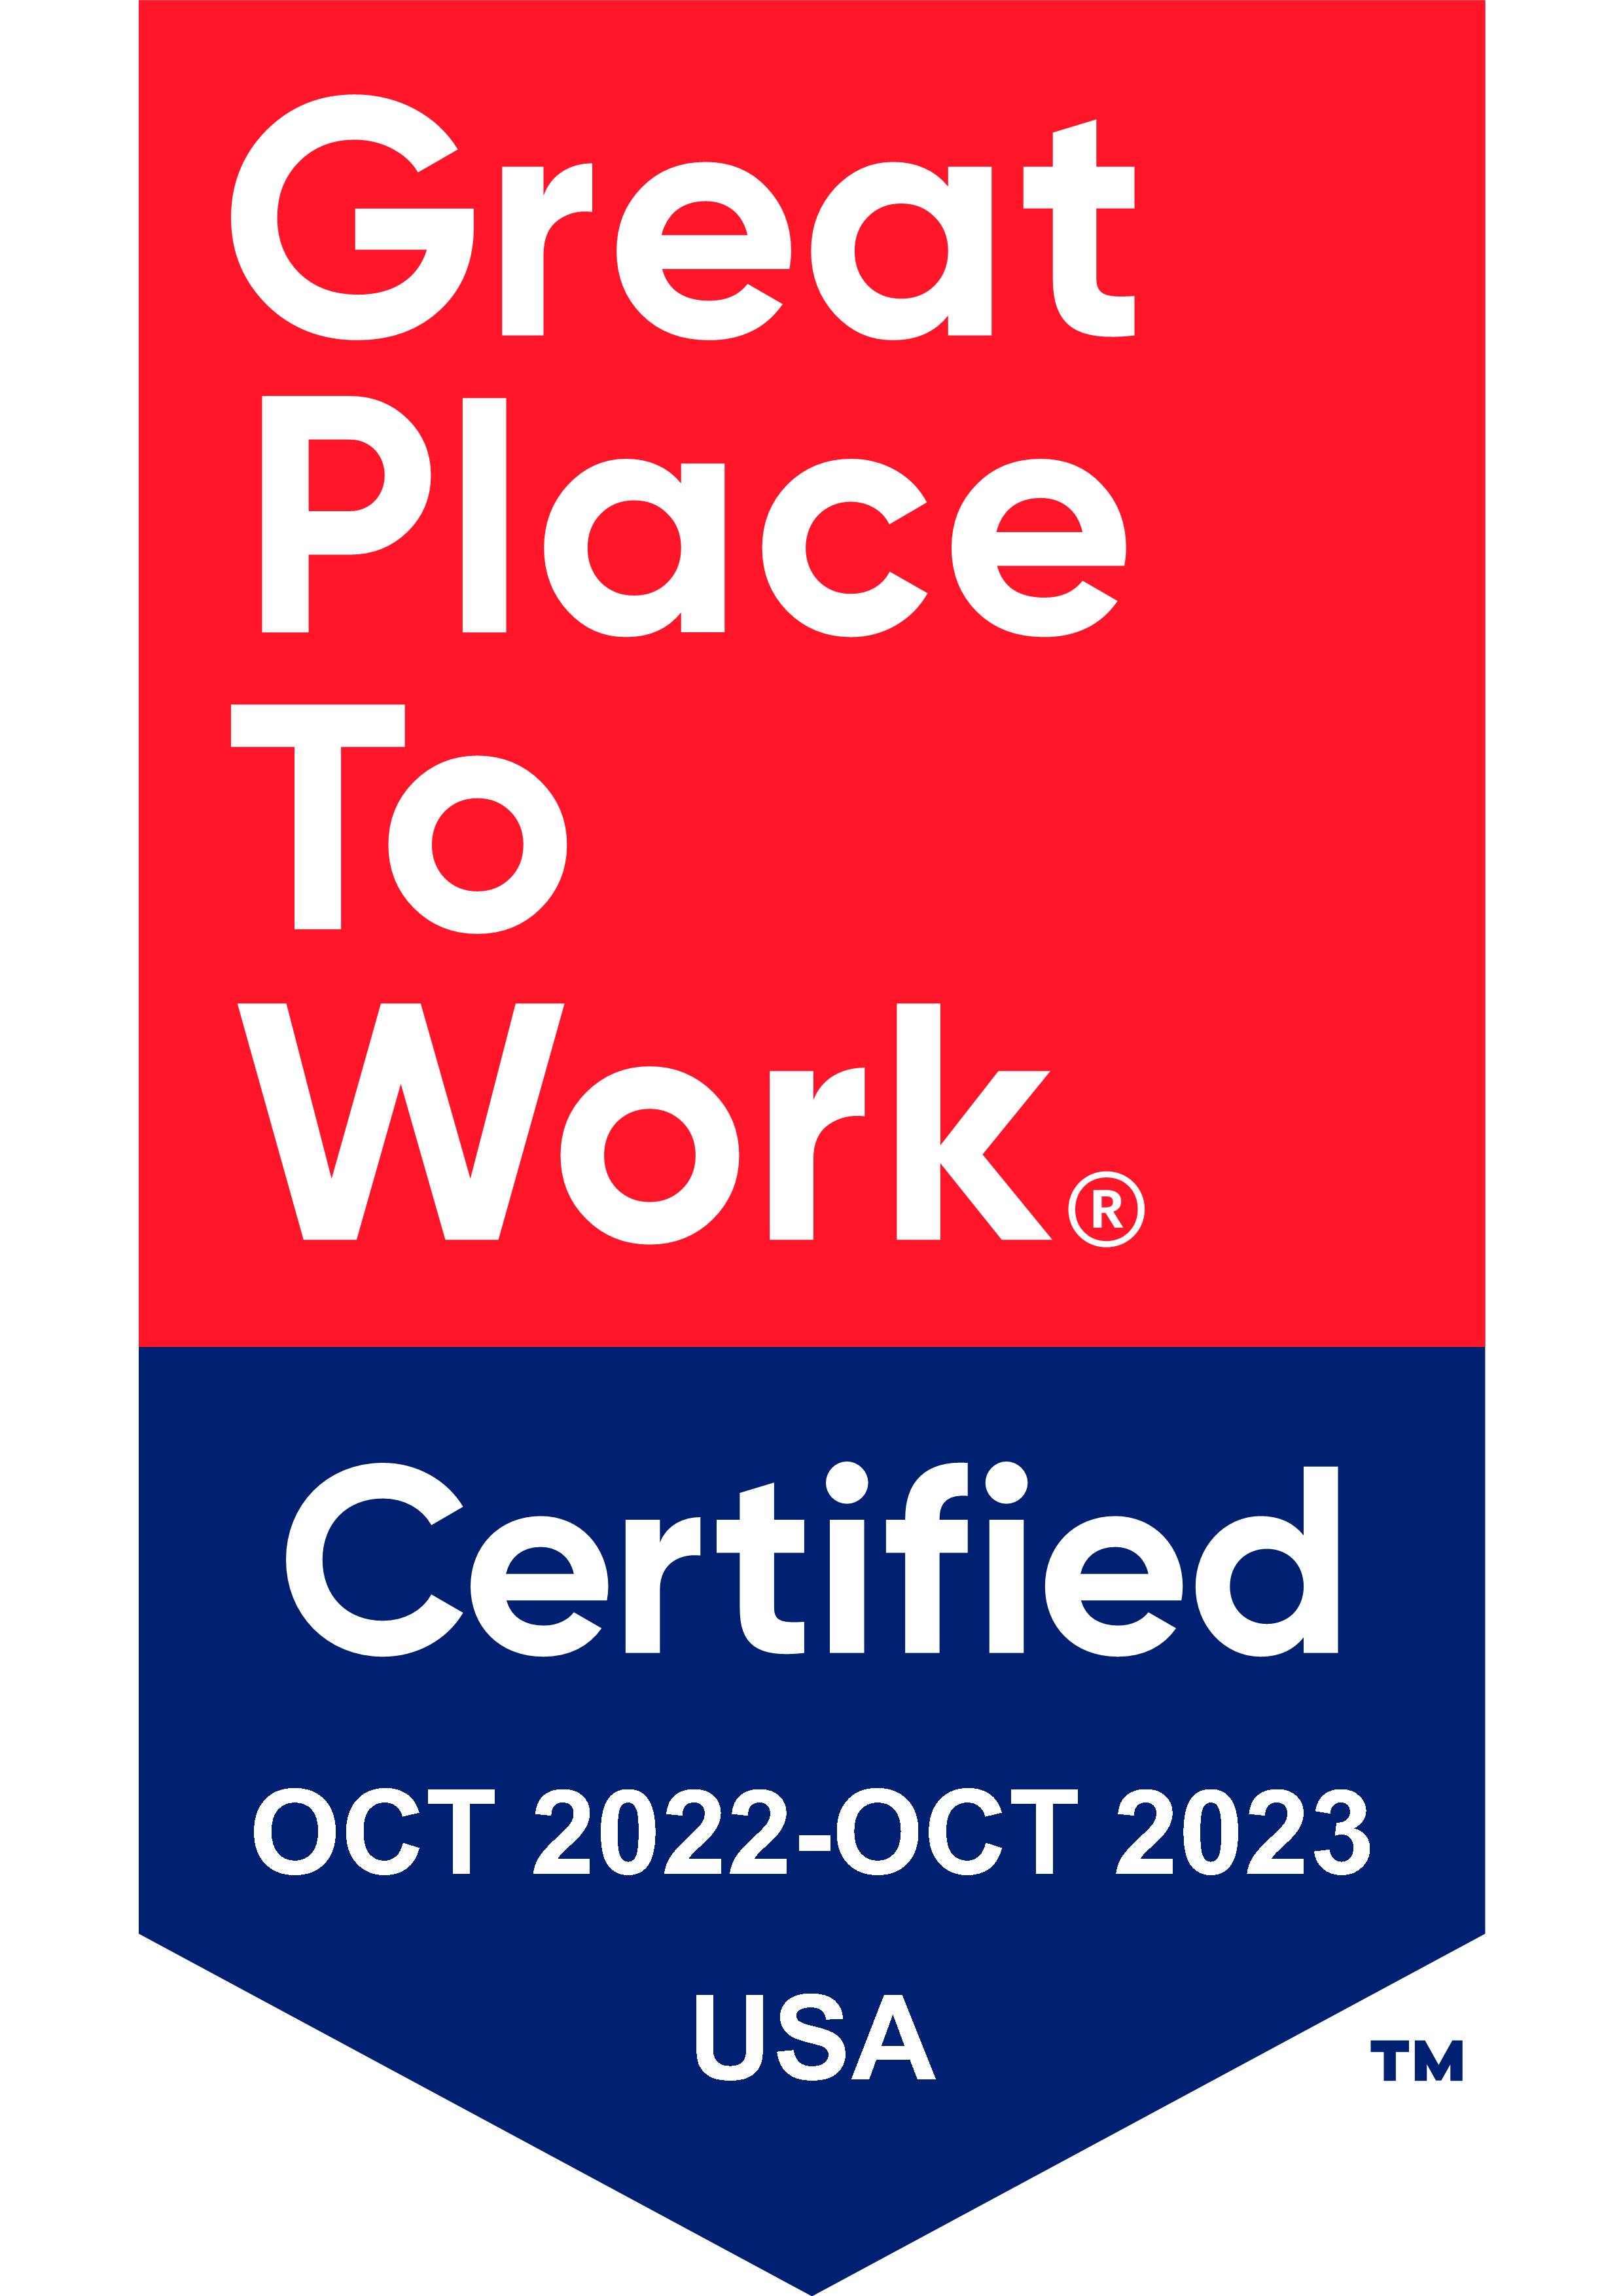 Great Place to Work ® Certified: November of 2021 to November of 2022